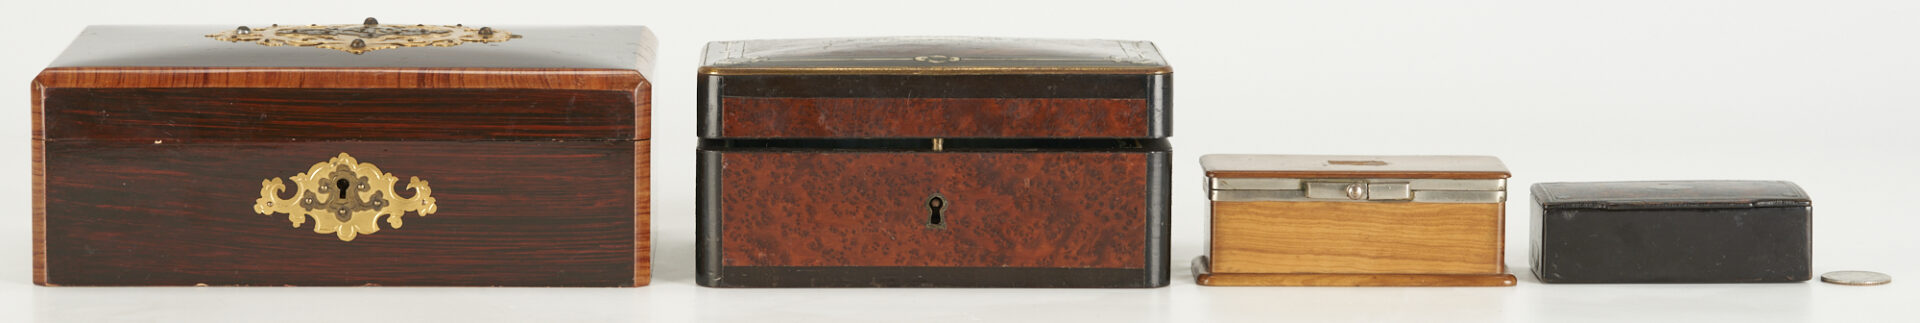 Lot 696: 4 European Wood Boxes, incl. Stamp Box